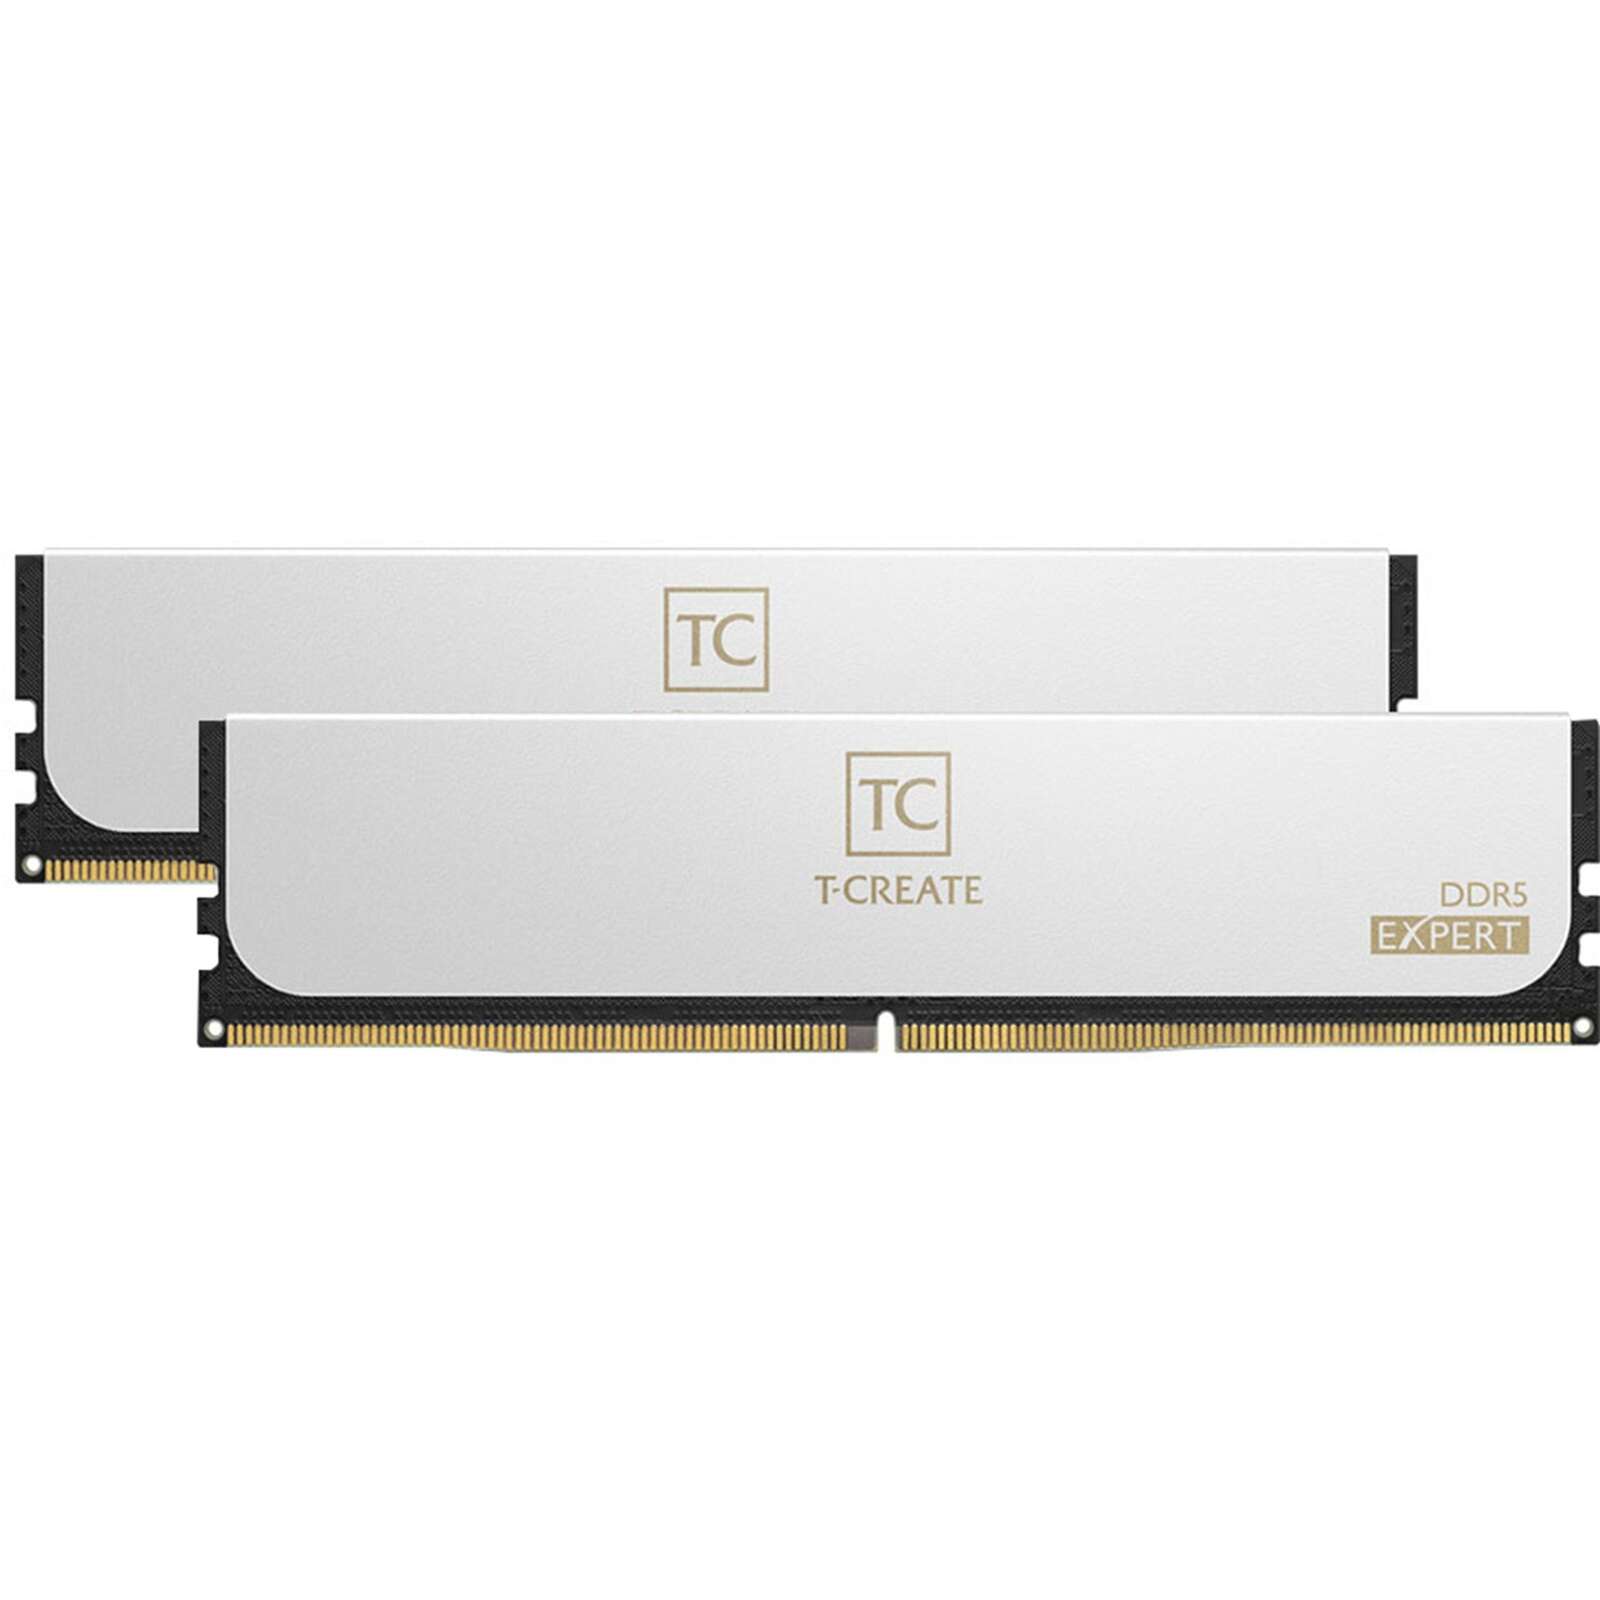 Teamgroup 96gb / 6800 t-create expert ddr5 ram kit (2x48gb) - feh...